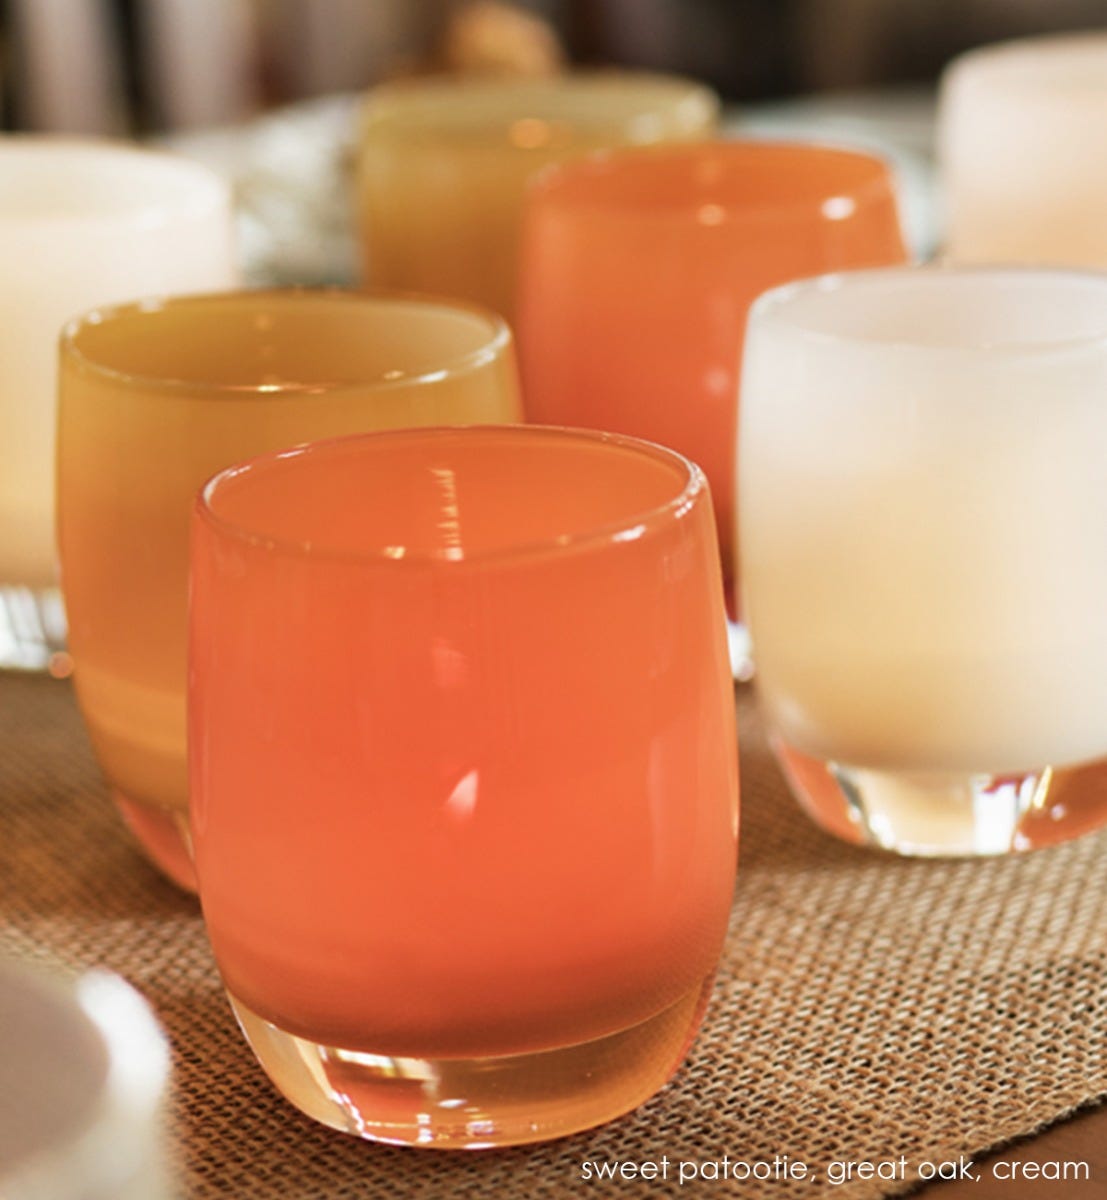 sweet patootie, apricot orange, hand-blown glass votive candle holder. Paired with great oak and cream.